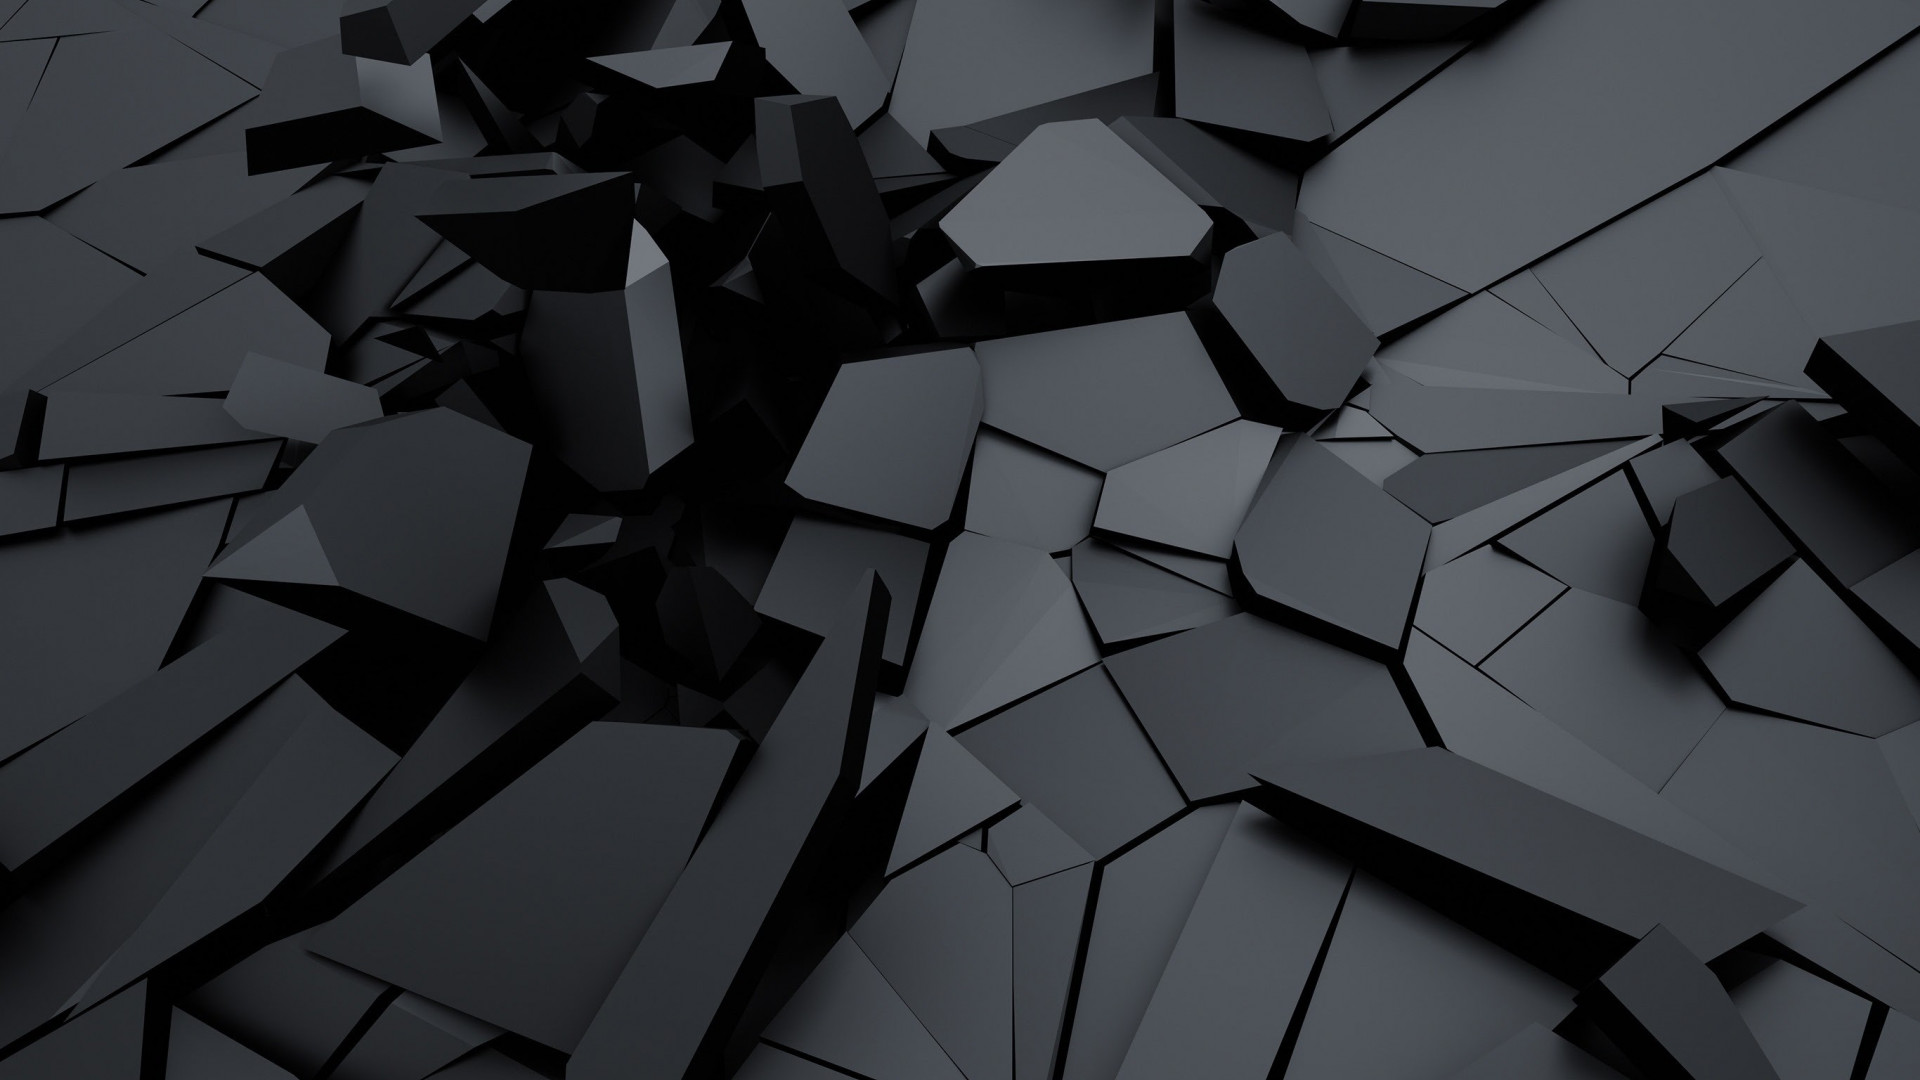 Cracked surface wallpaper 1920x1080